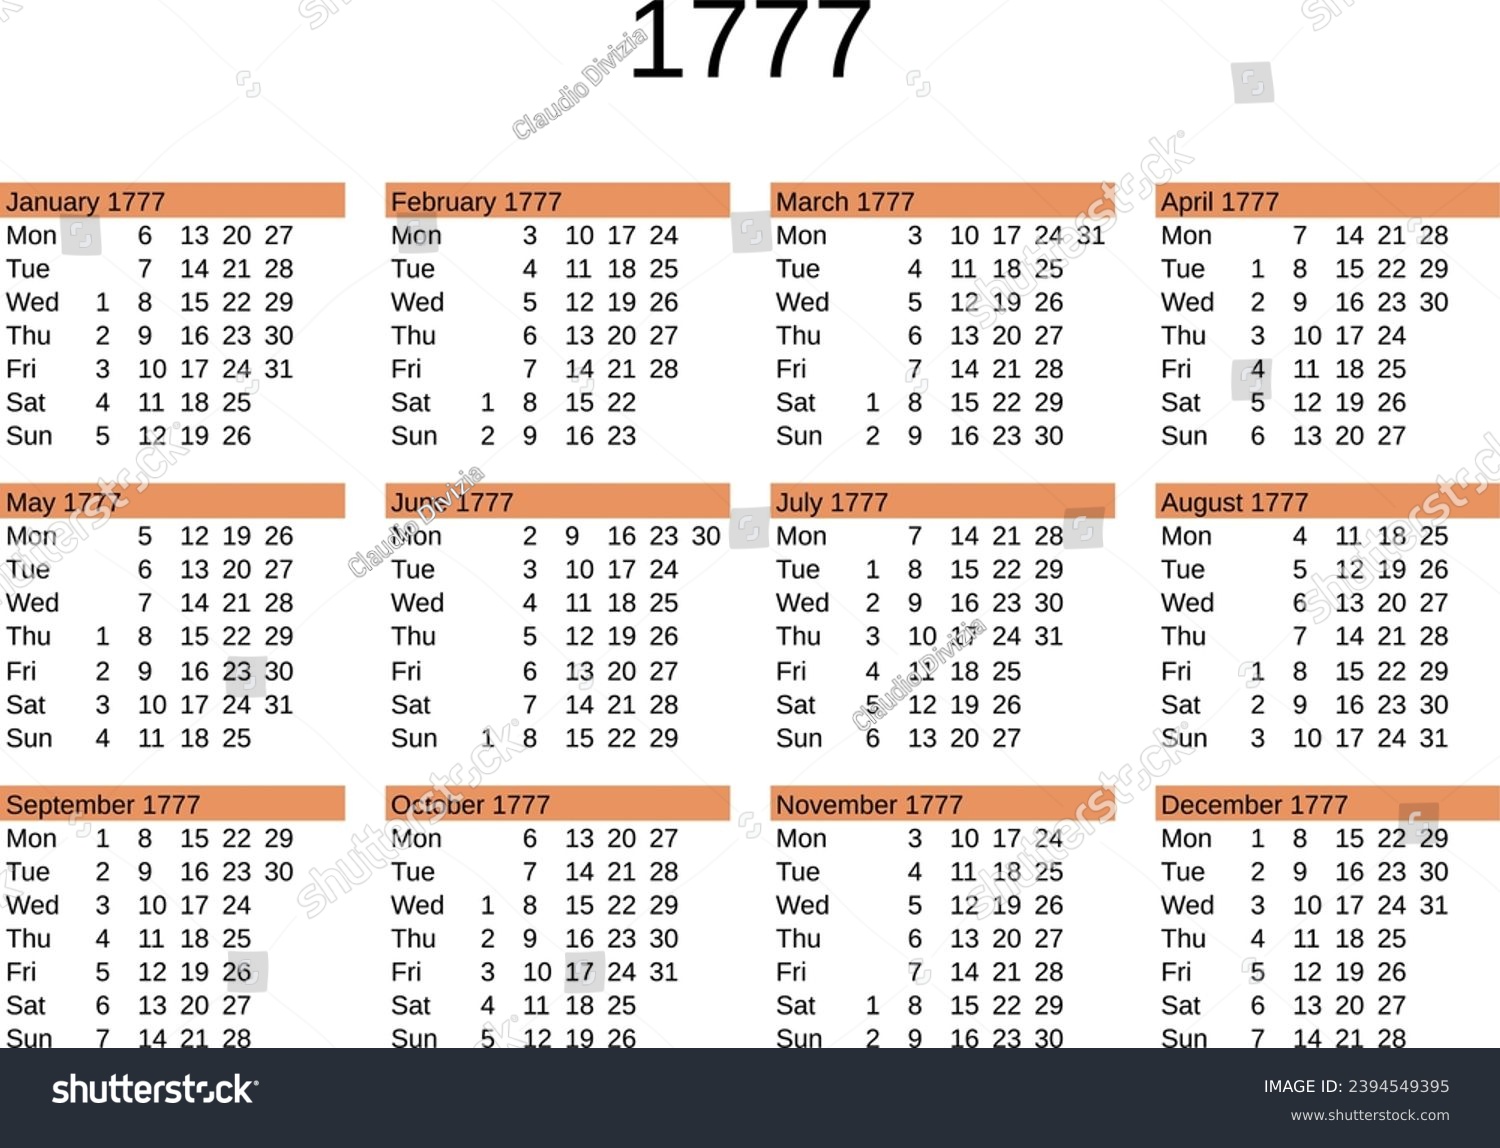 SVG of calendar of year 1777 in English language svg